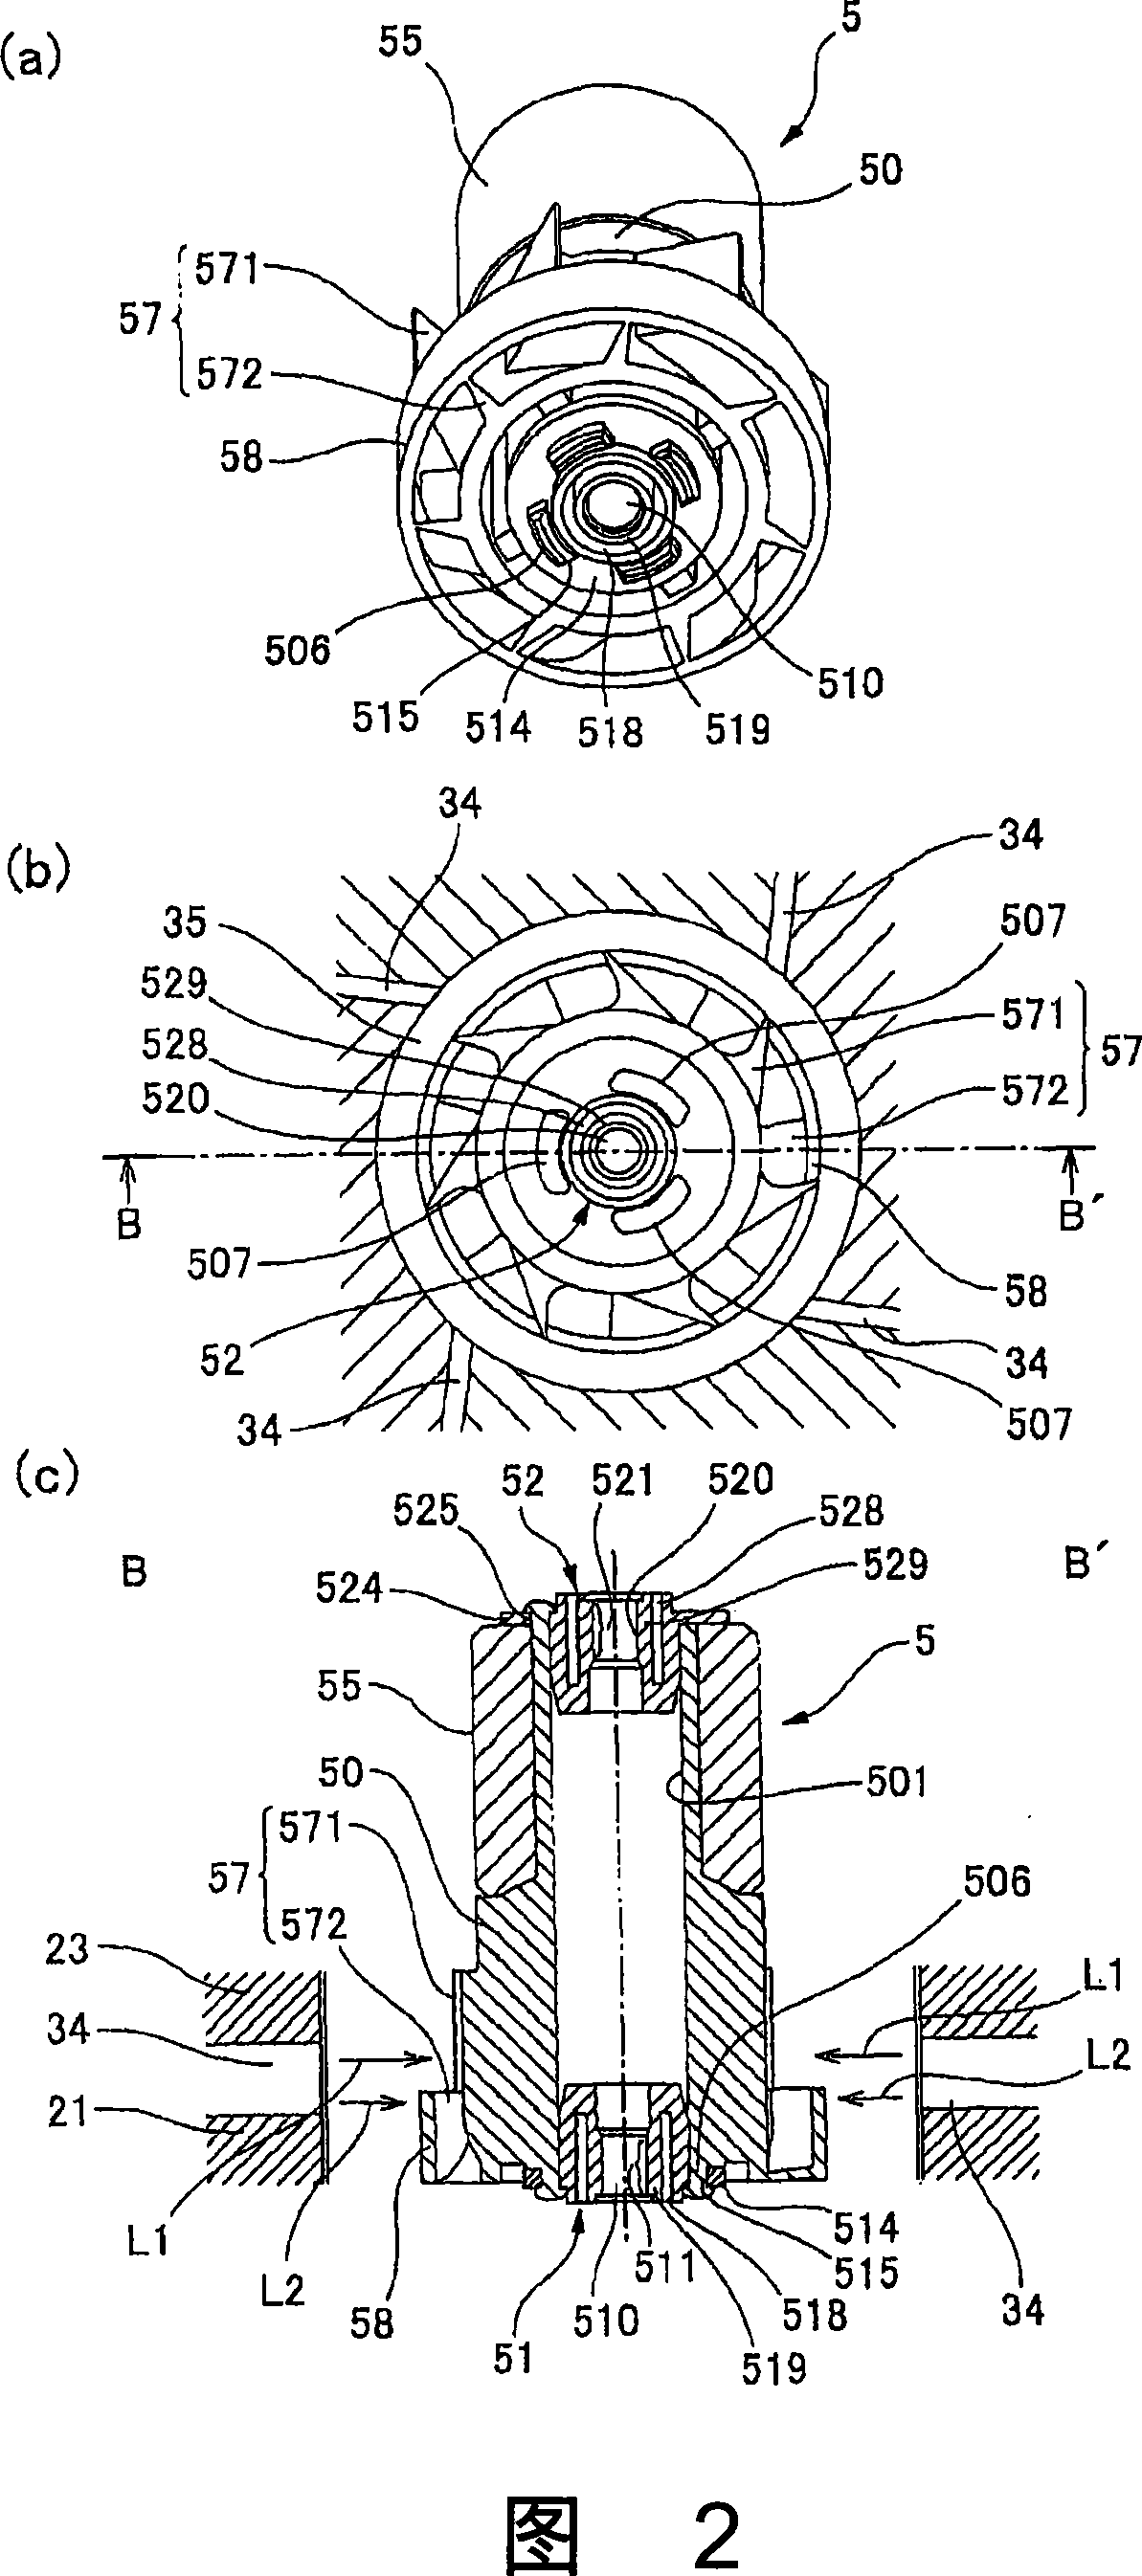 Hydraulic power generating device and manufacturing method therefor